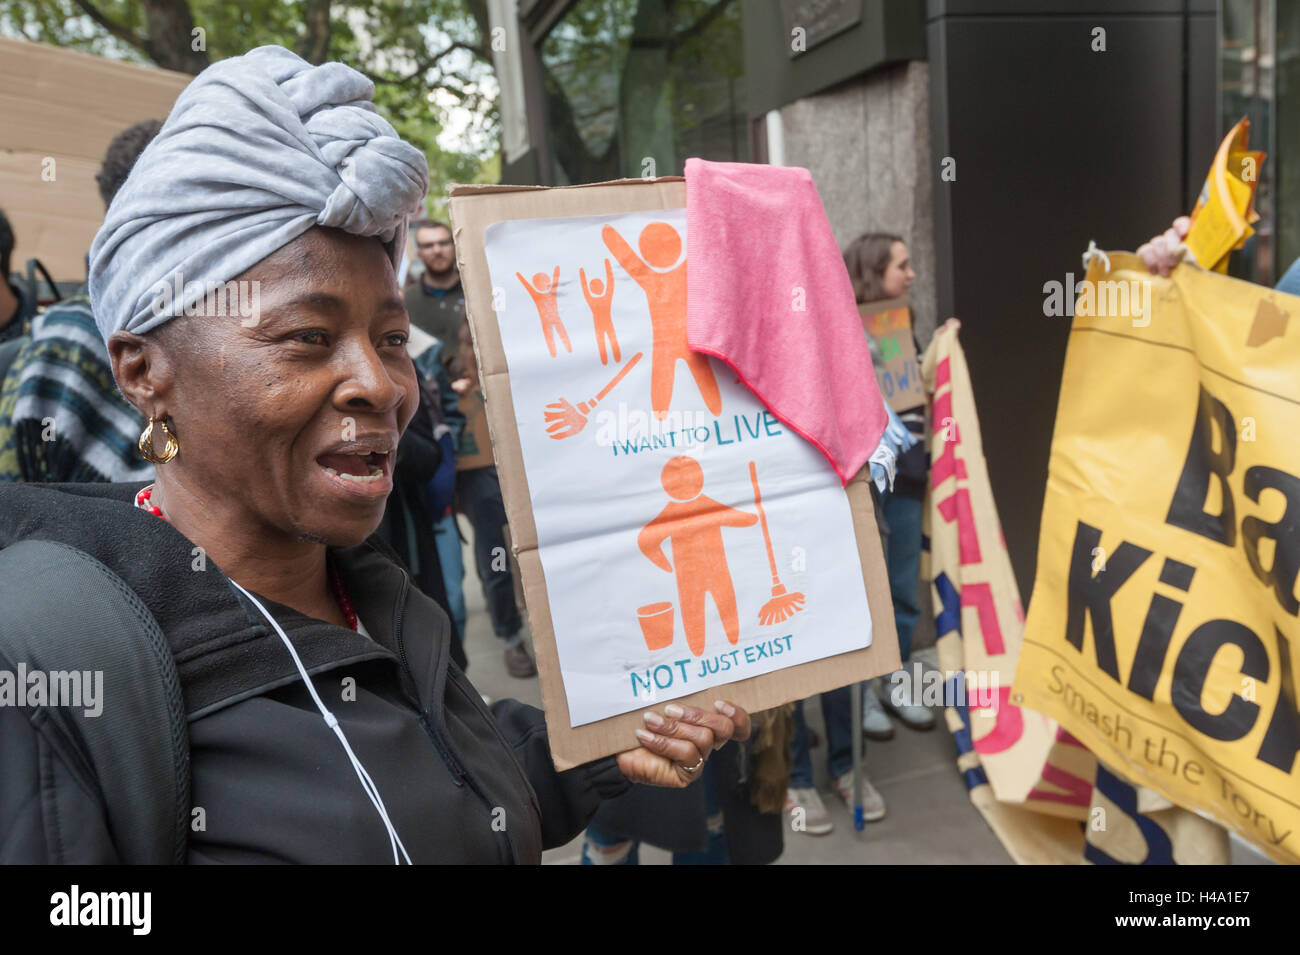 London, UK. 14th October 2016. One of three LSE cleaners who was unfairly sacked in the past but reinstated after action by her union at the protest over the sacking of Alba, a 62-year old Ecuadorian cleaner who is one of the longest serving members of the cleaning team at the London School of Economics  outside the LSE Kingsway building where cleaning contractors Noonan have their office. The United Voices of the World union say Alba has been unfairly sacked in breach of employment law and the protest demanded he re-instatement. Credit:  Peter Marshall/Alamy Live News Stock Photo